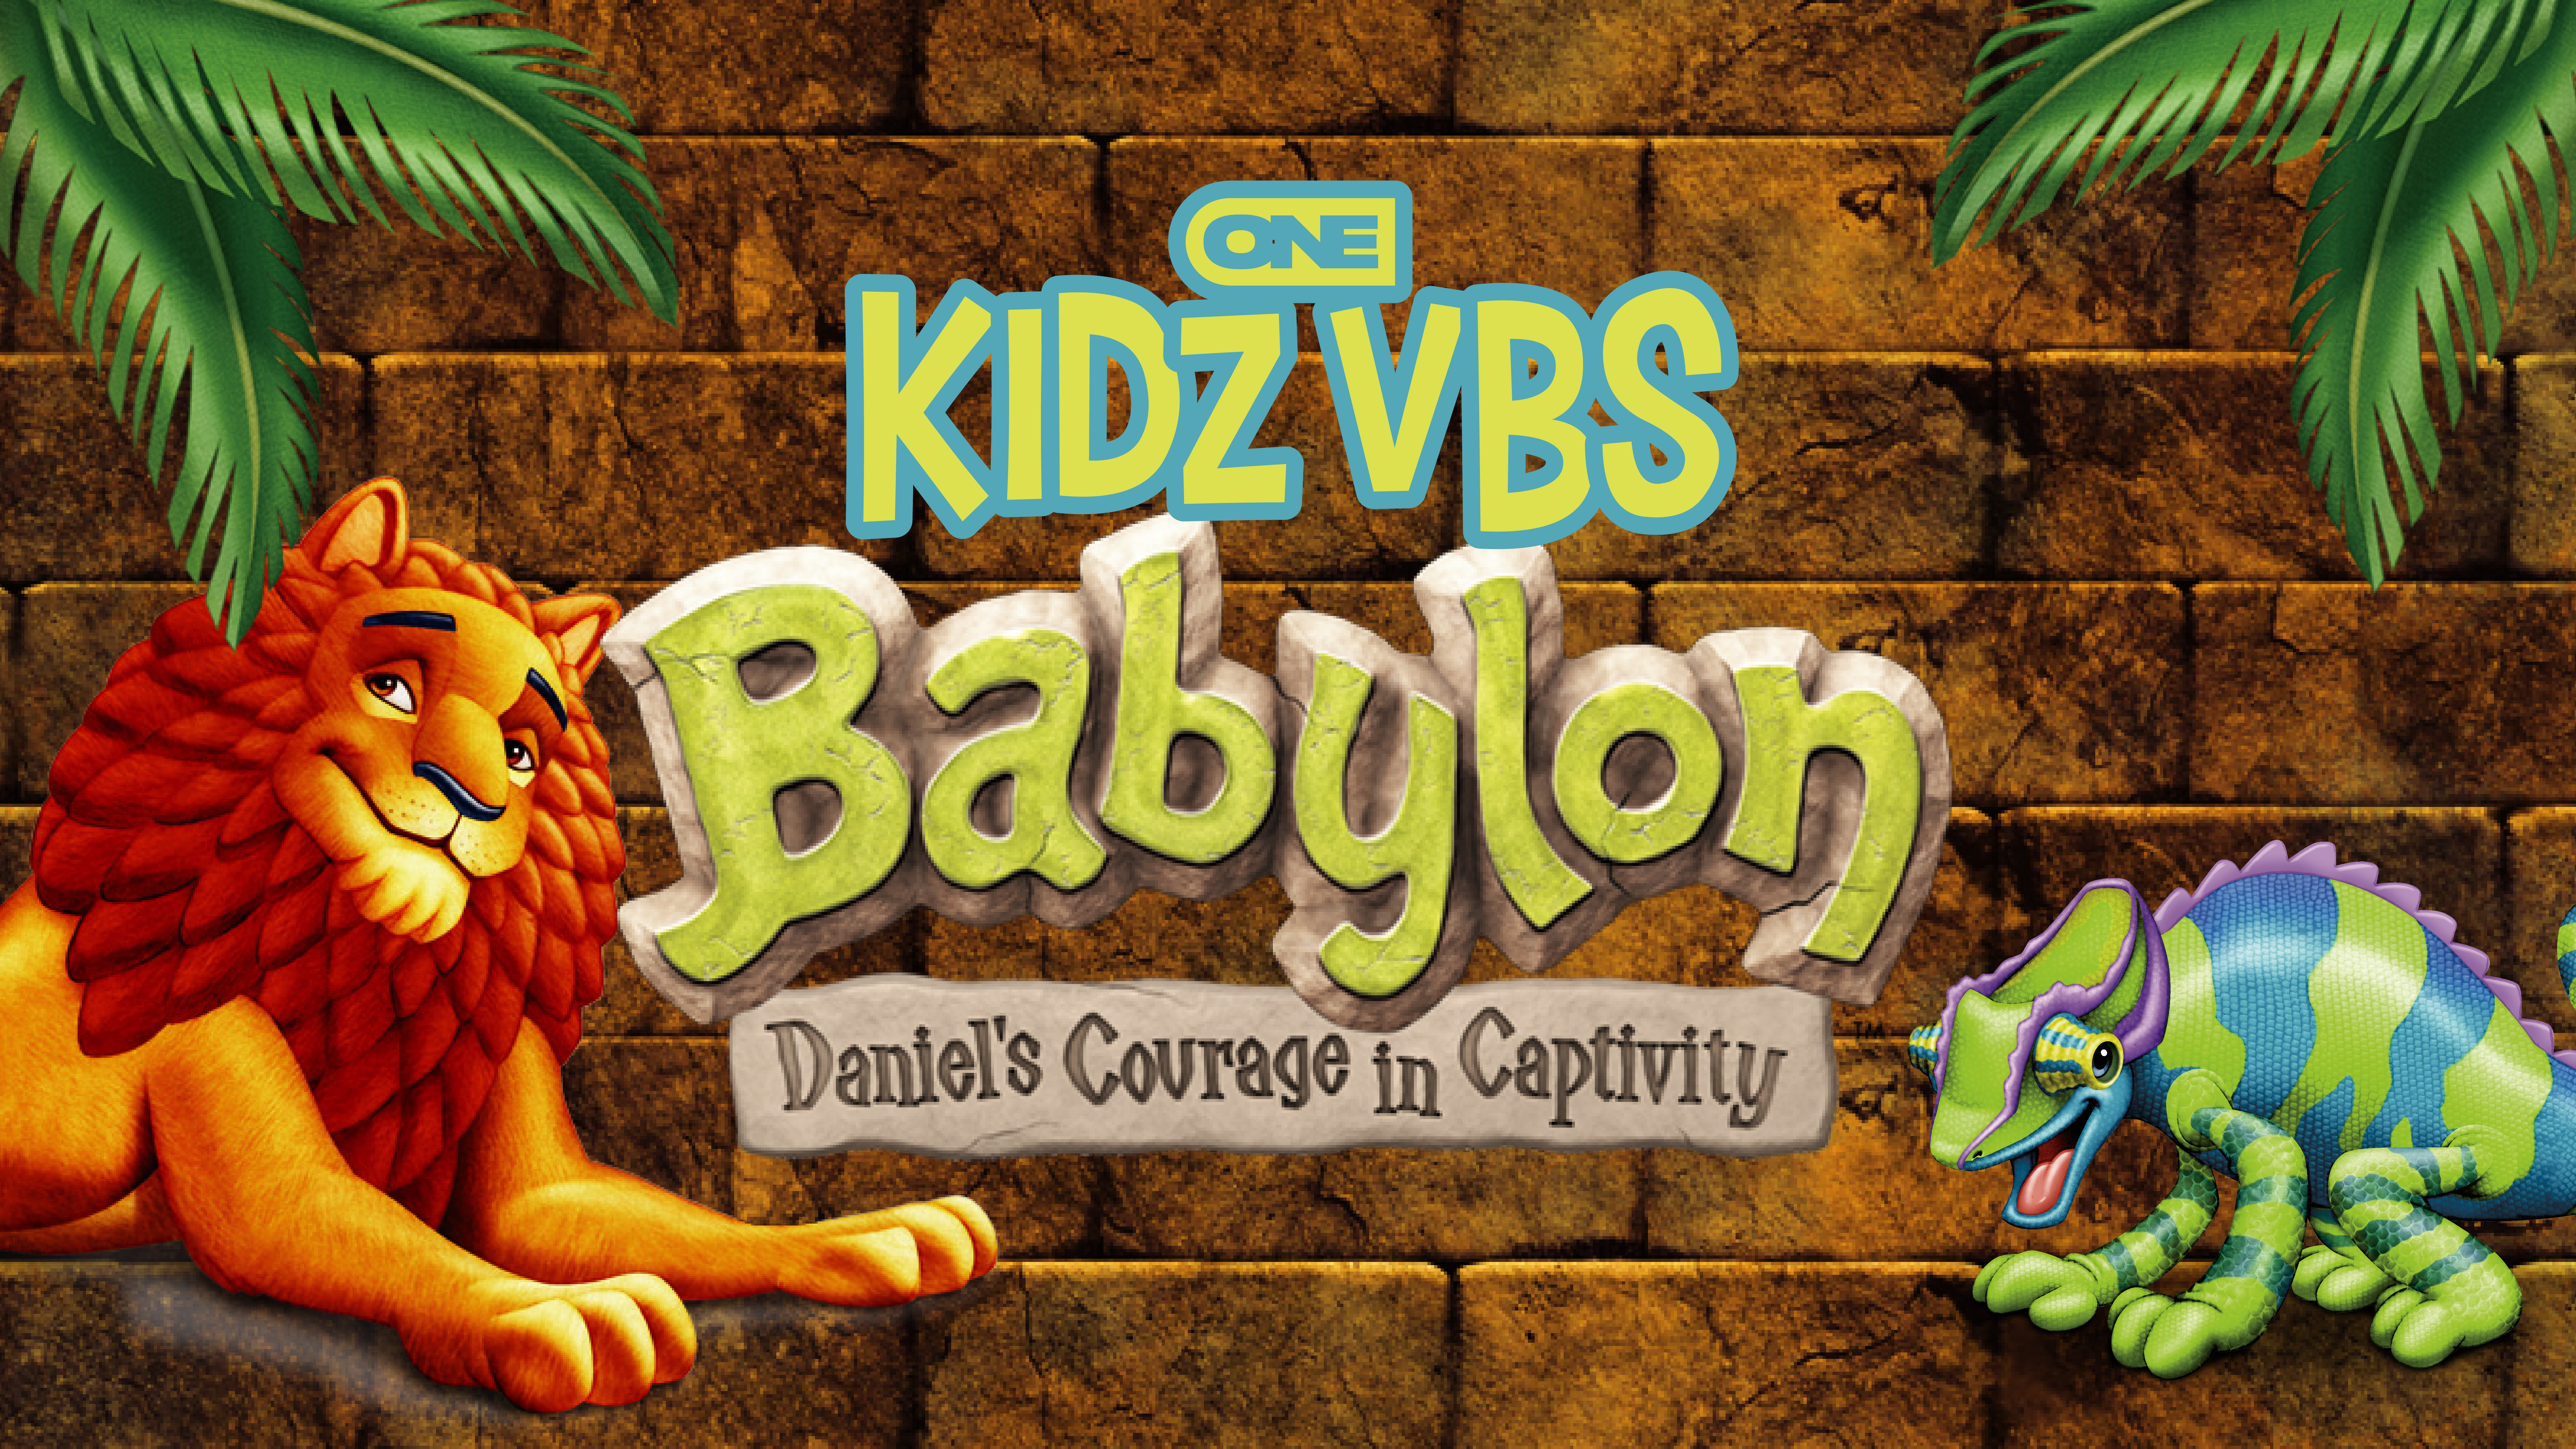 ONE_KIDZ_VBS_23_Screen and logo-01